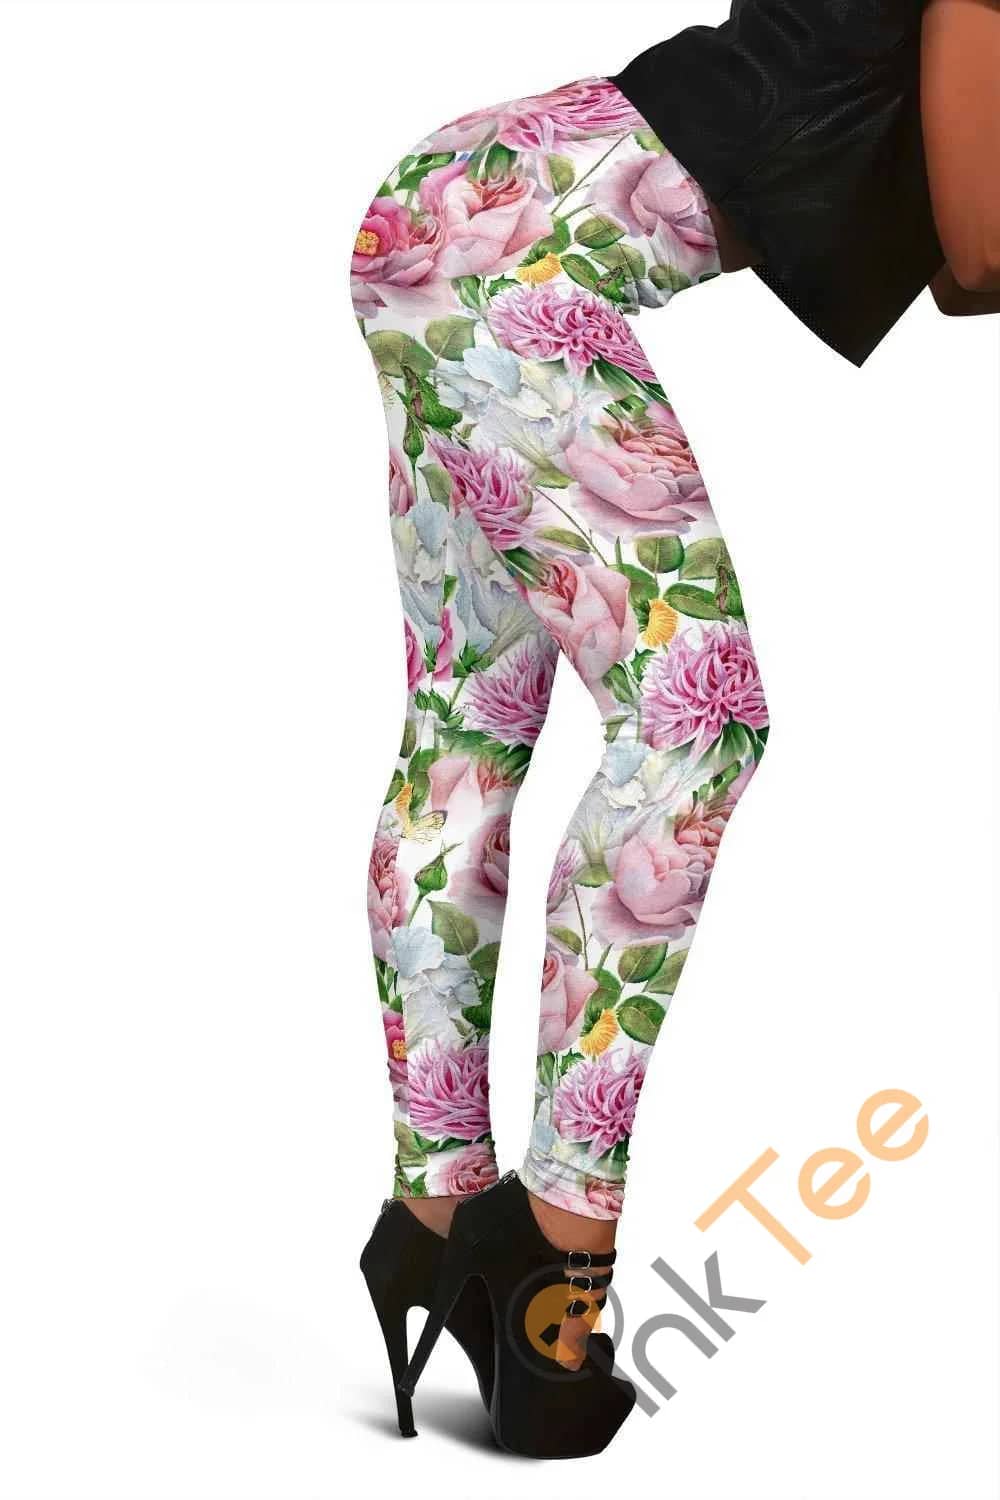 Watercolor Floral 3D All Over Print For Yoga Fitness Women's Leggings